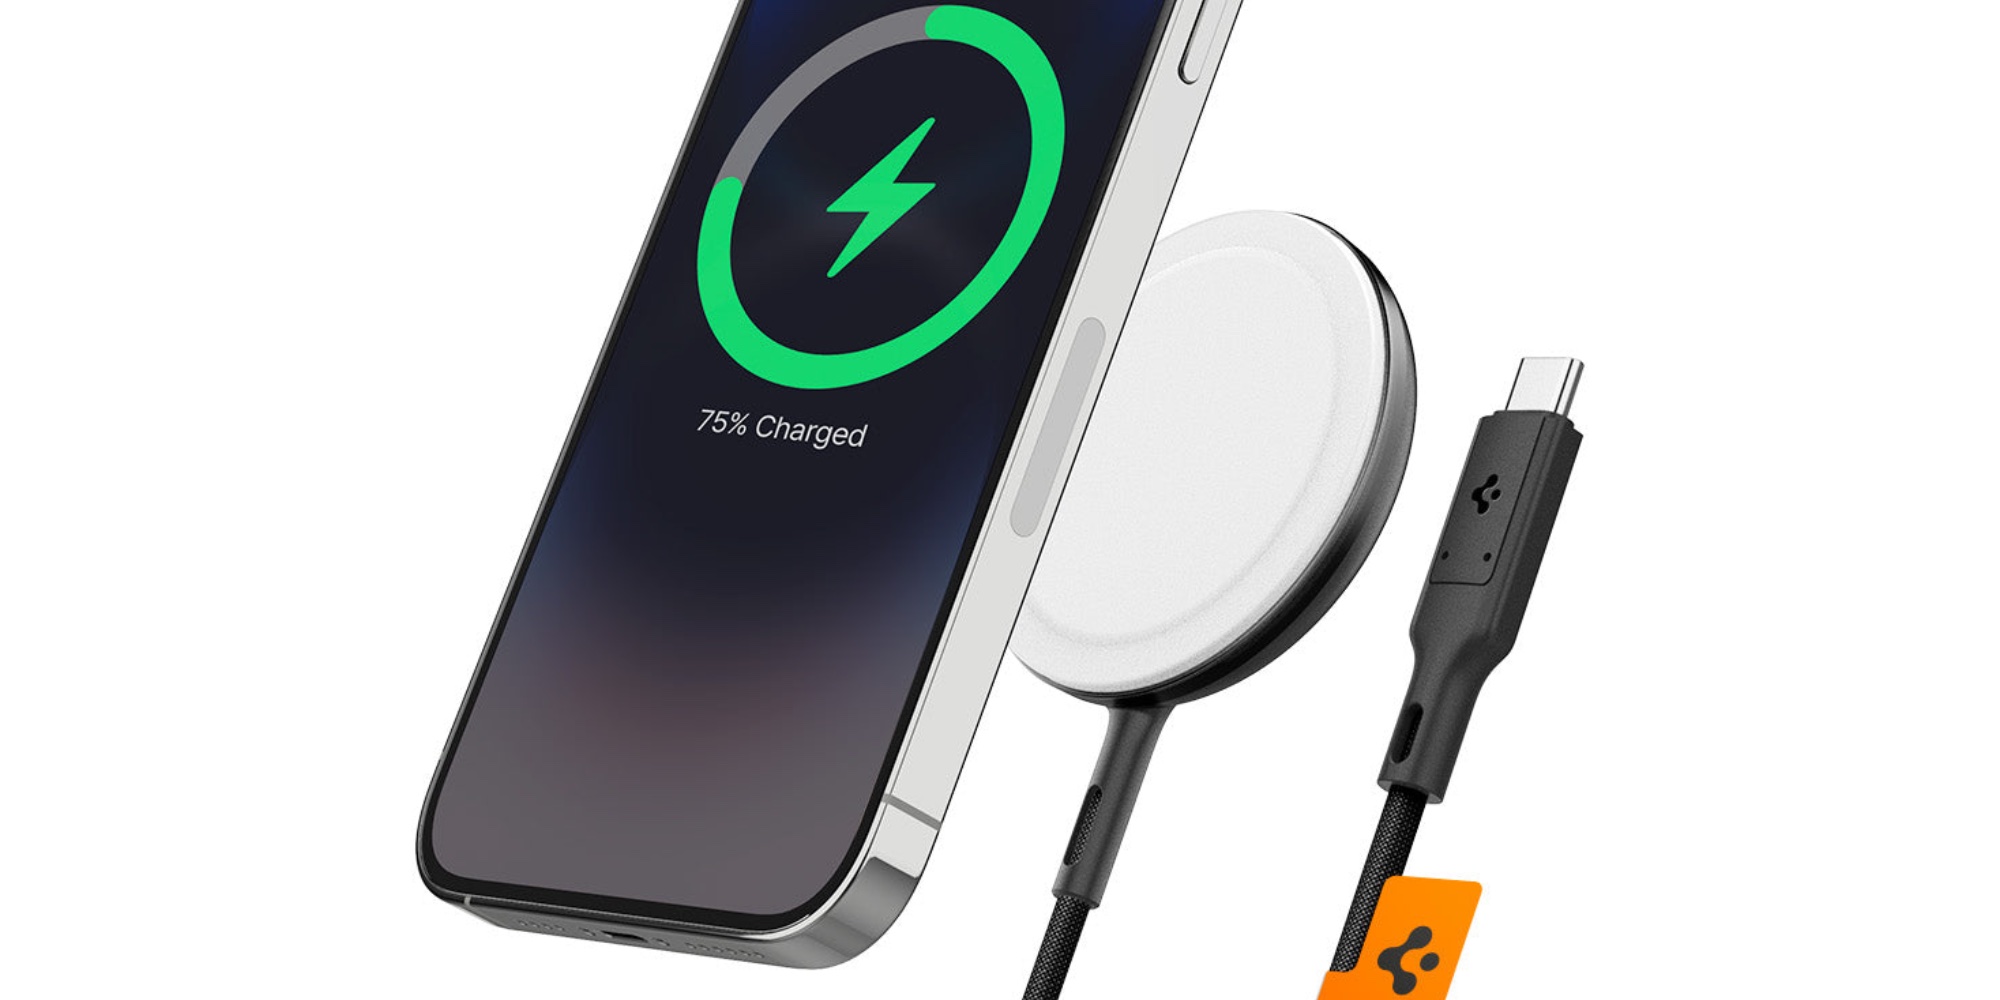 Spigen ArcField 15W MagSafe charger debuts